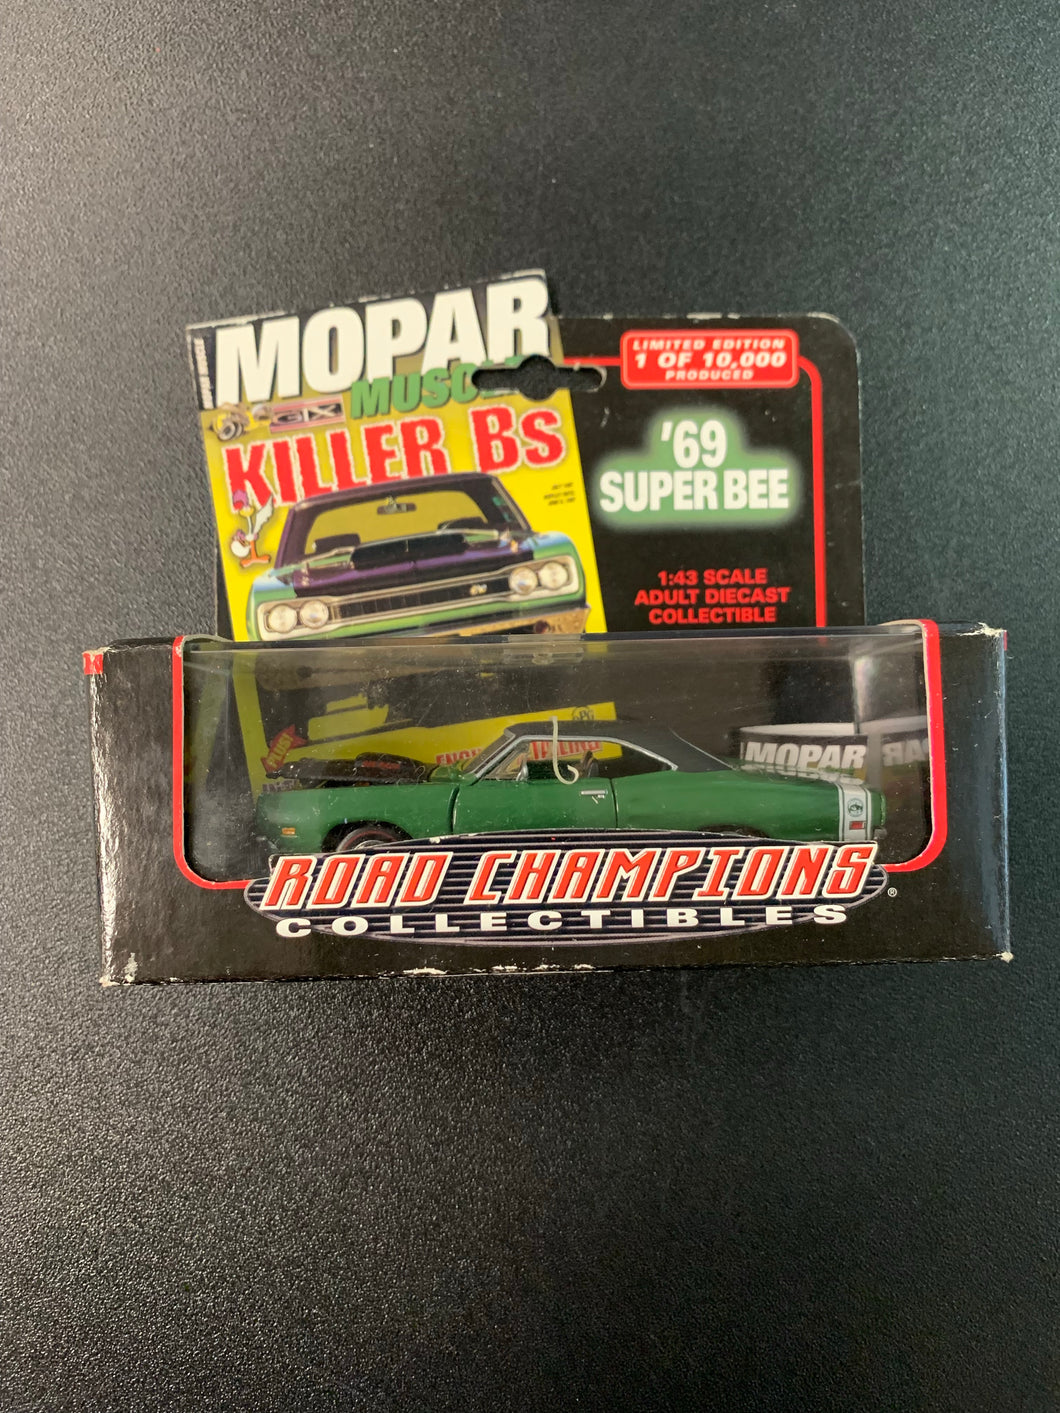 ROAD CHAMPIONS COLLECTIBLES 1969 DODGE SUPER BEE